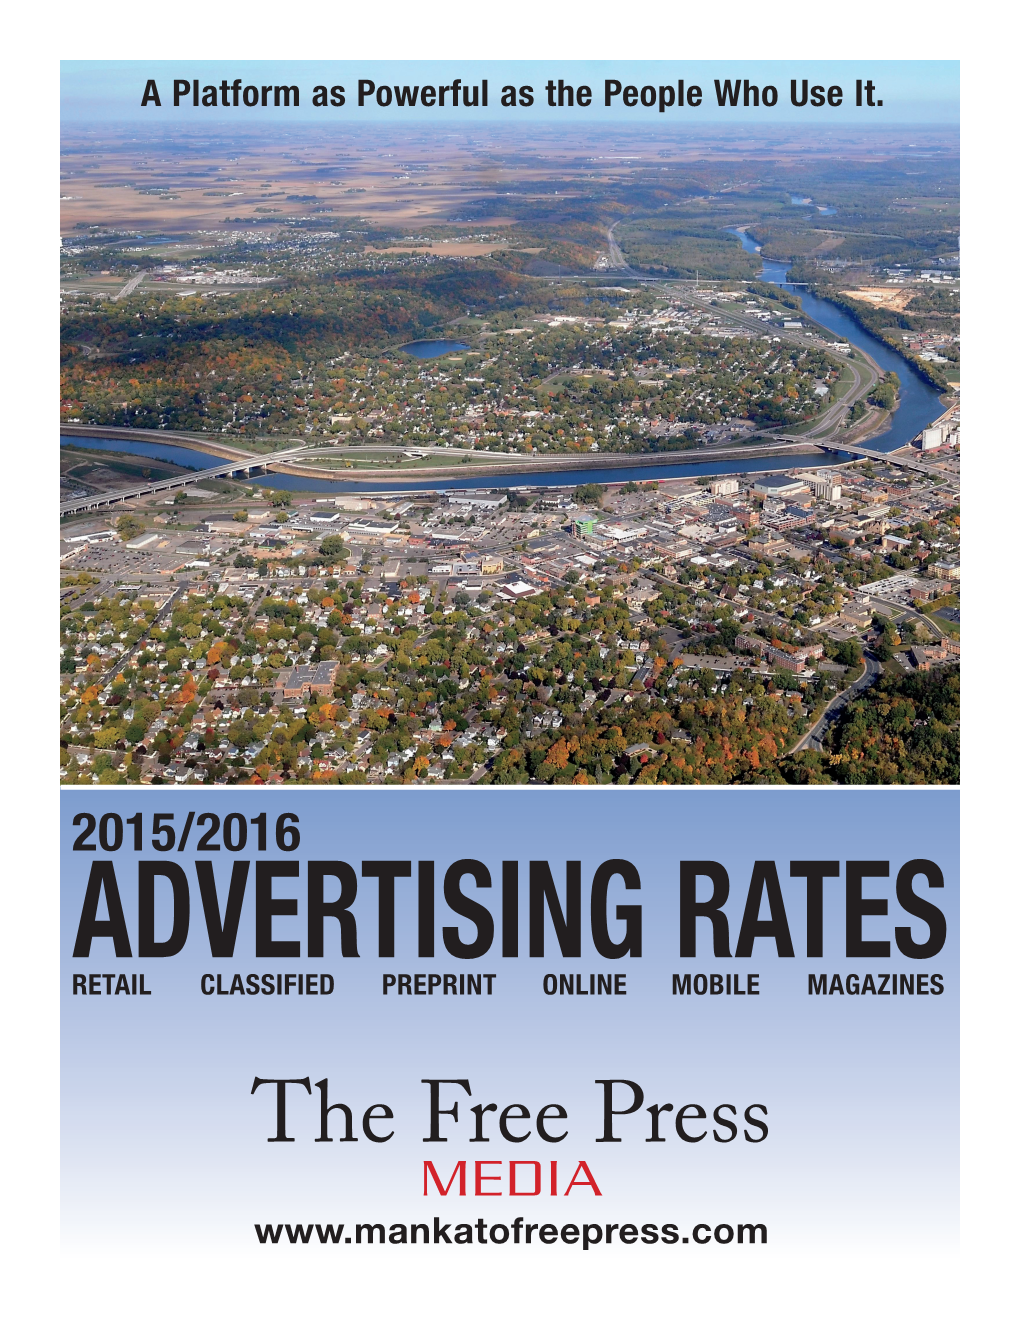 The Free Press MEDIA Effective October 1, 2015 - September 30, 2016 the Free Press MEDIA